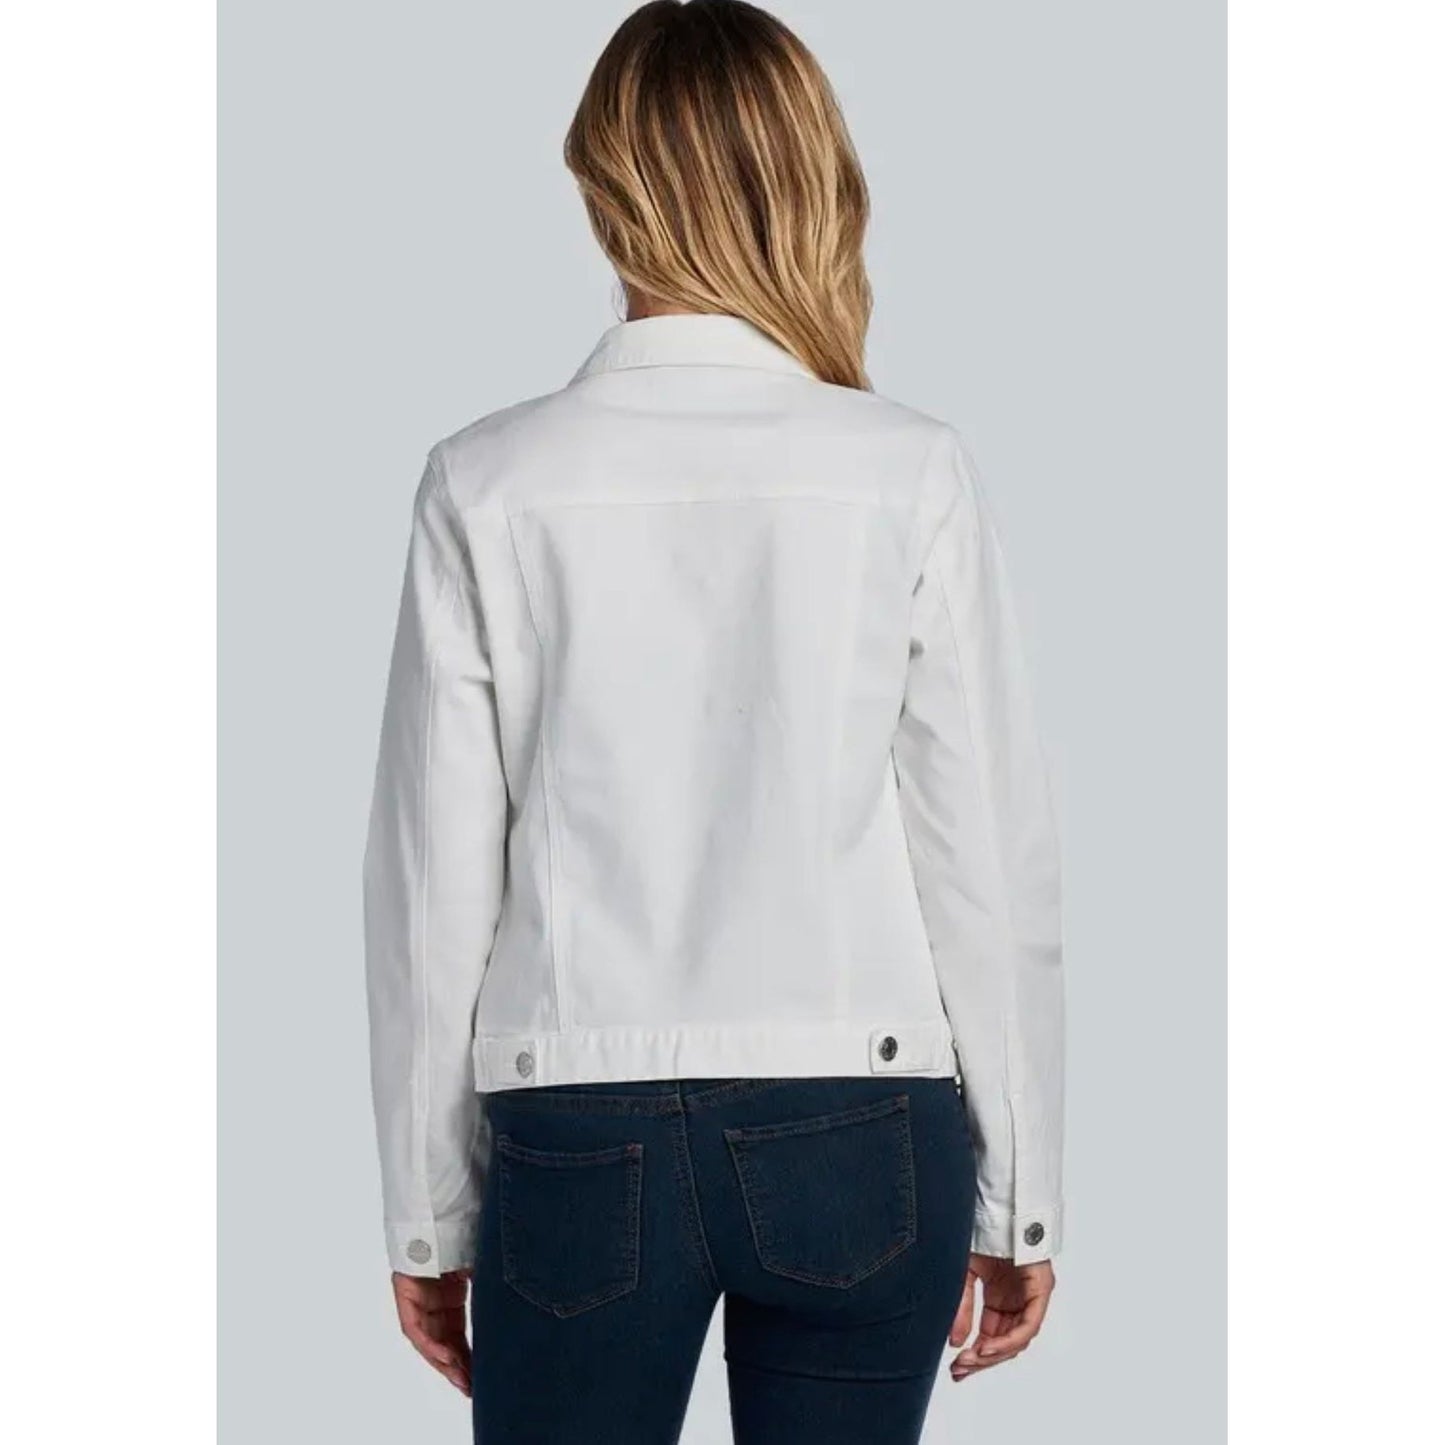 Women's White Denim Jacket: Perfect for Casual Days and Office Chic